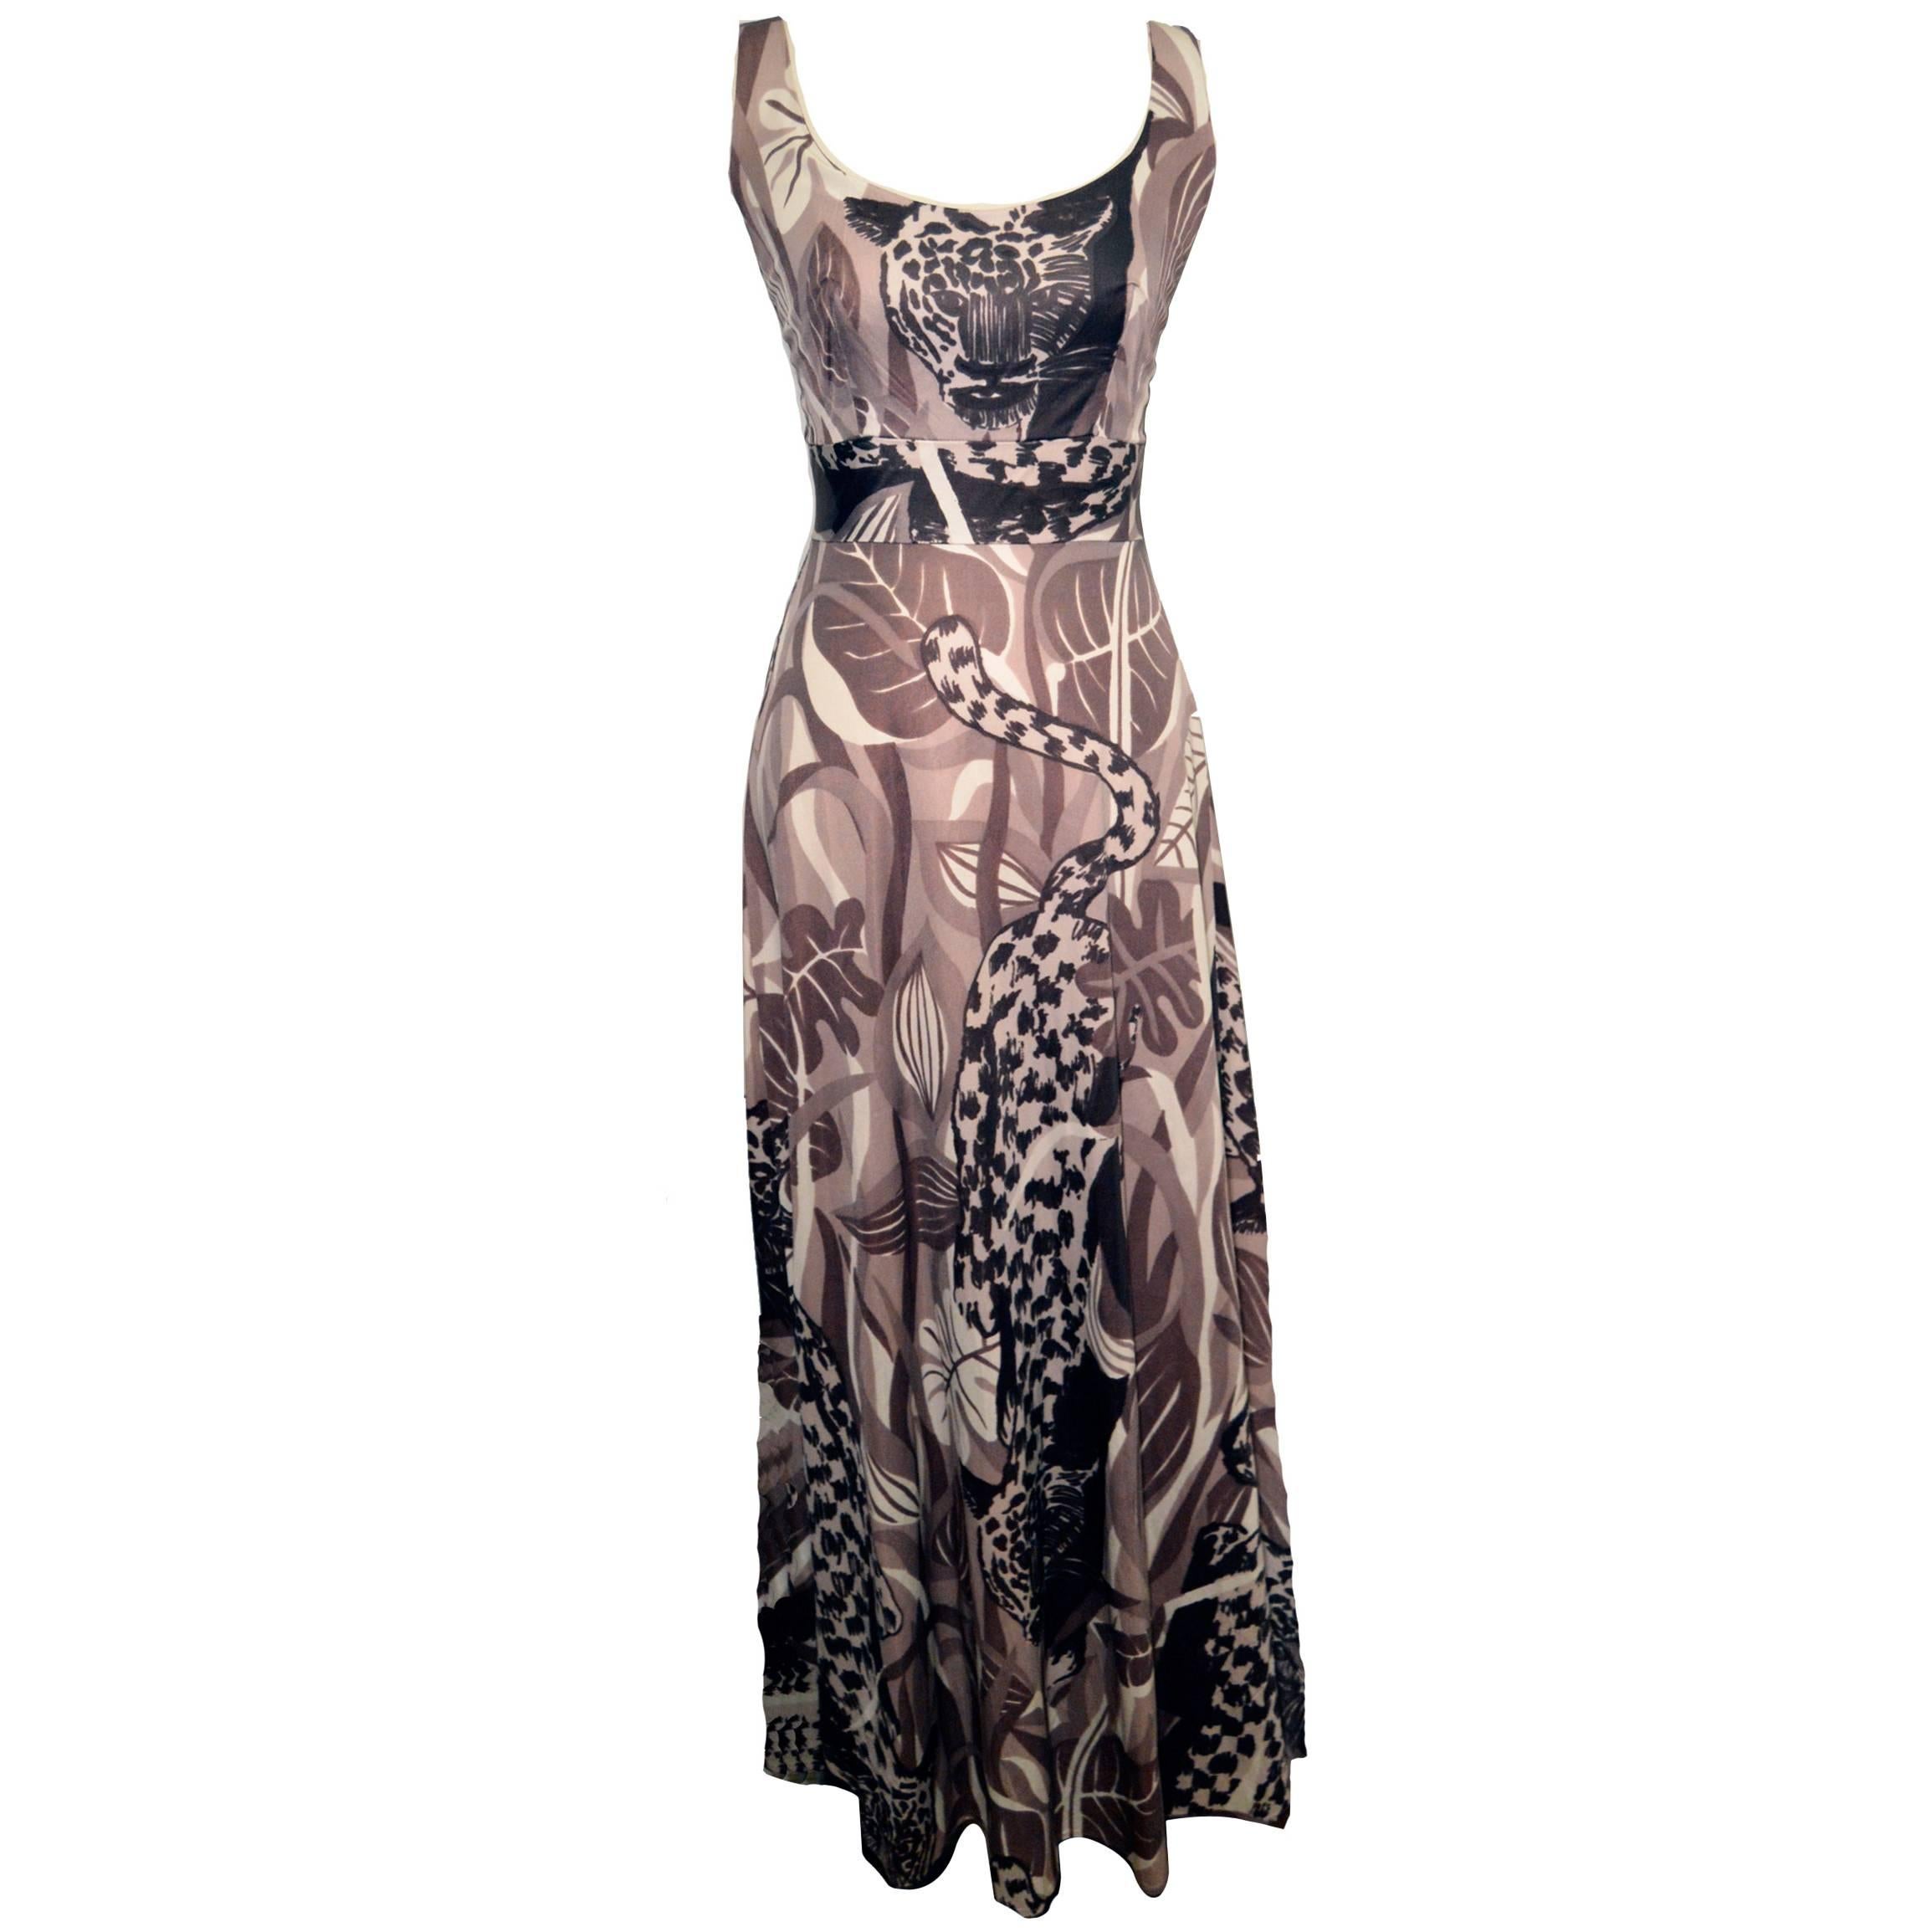 Futura Couture 1960s Abstract Leopard Print Maxi Dress Size Small